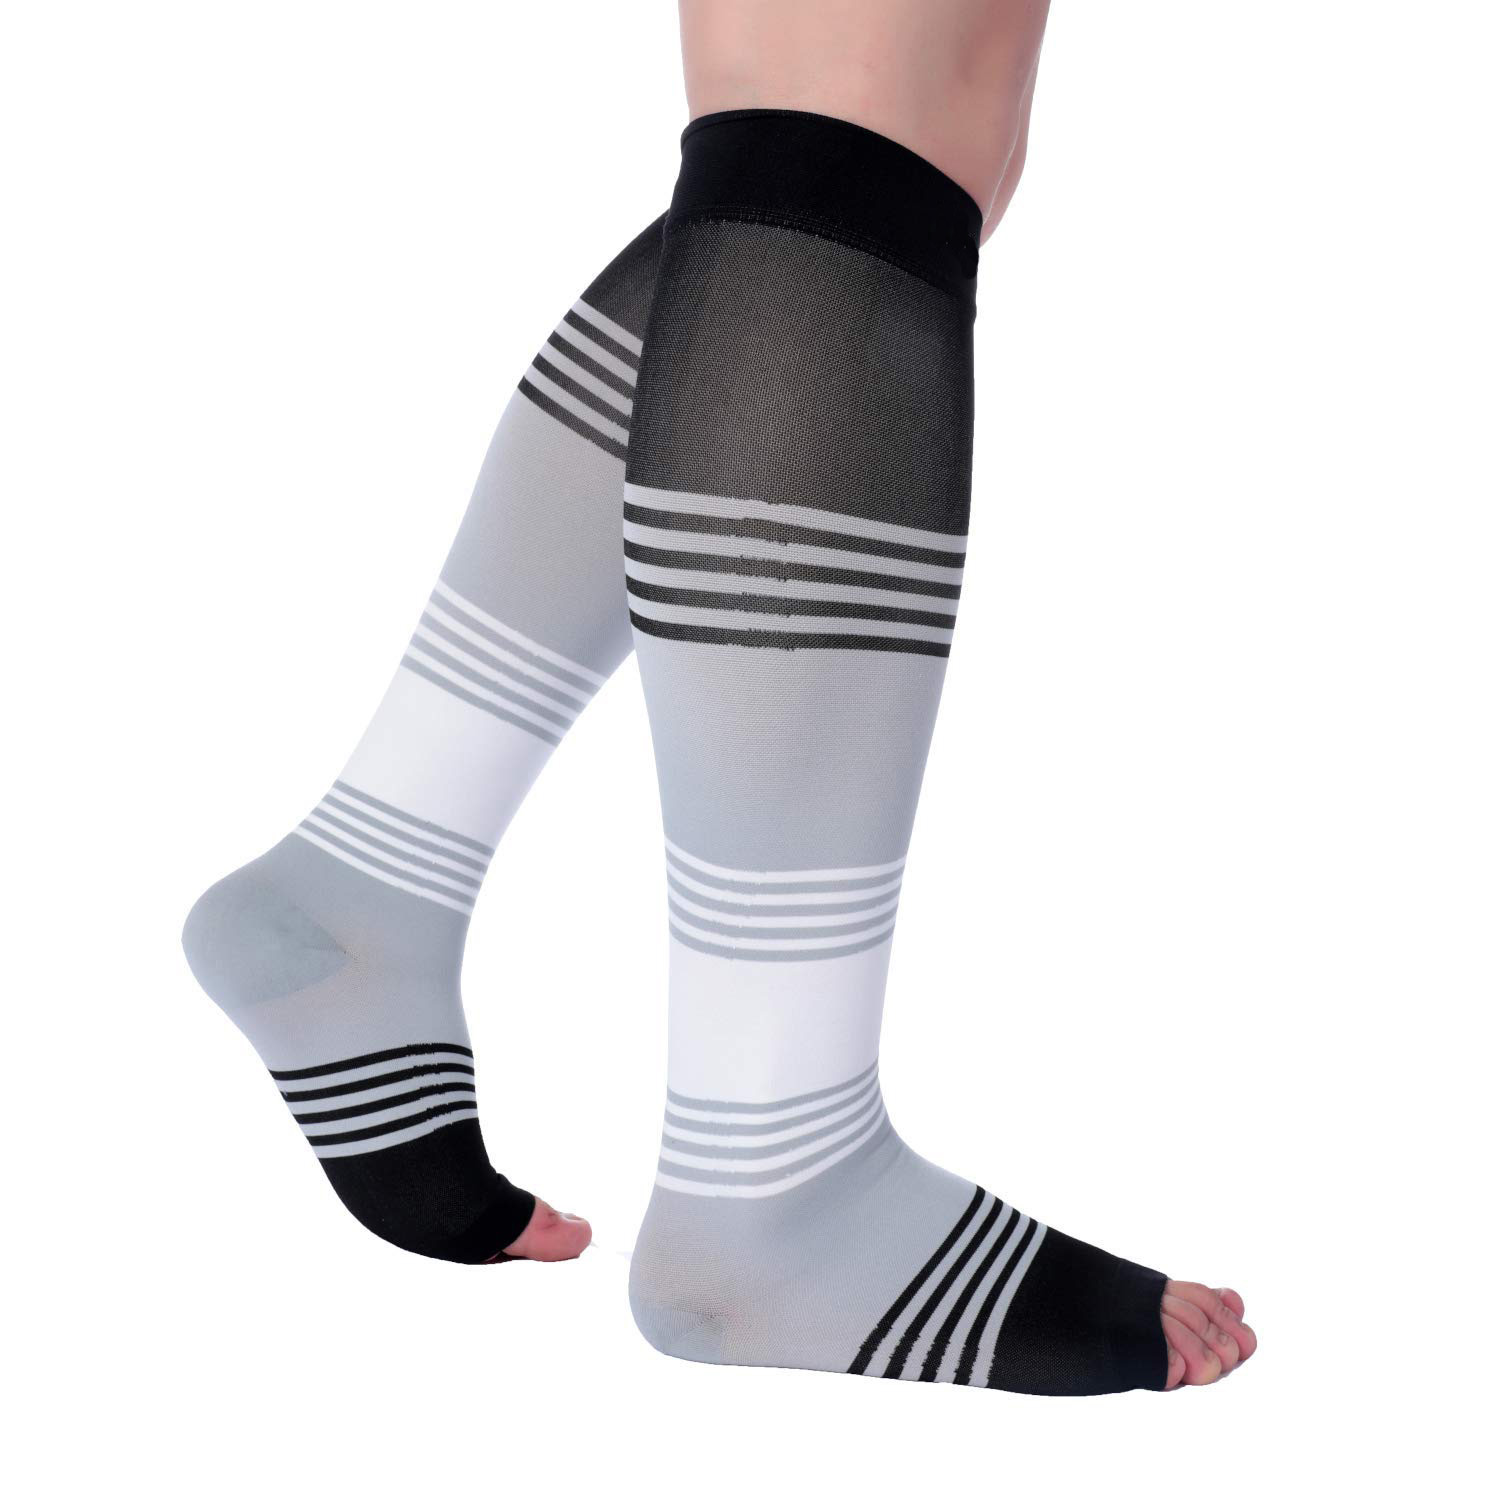 Unisex Knee-High Medical Compression Stockings Varicose Veins Open